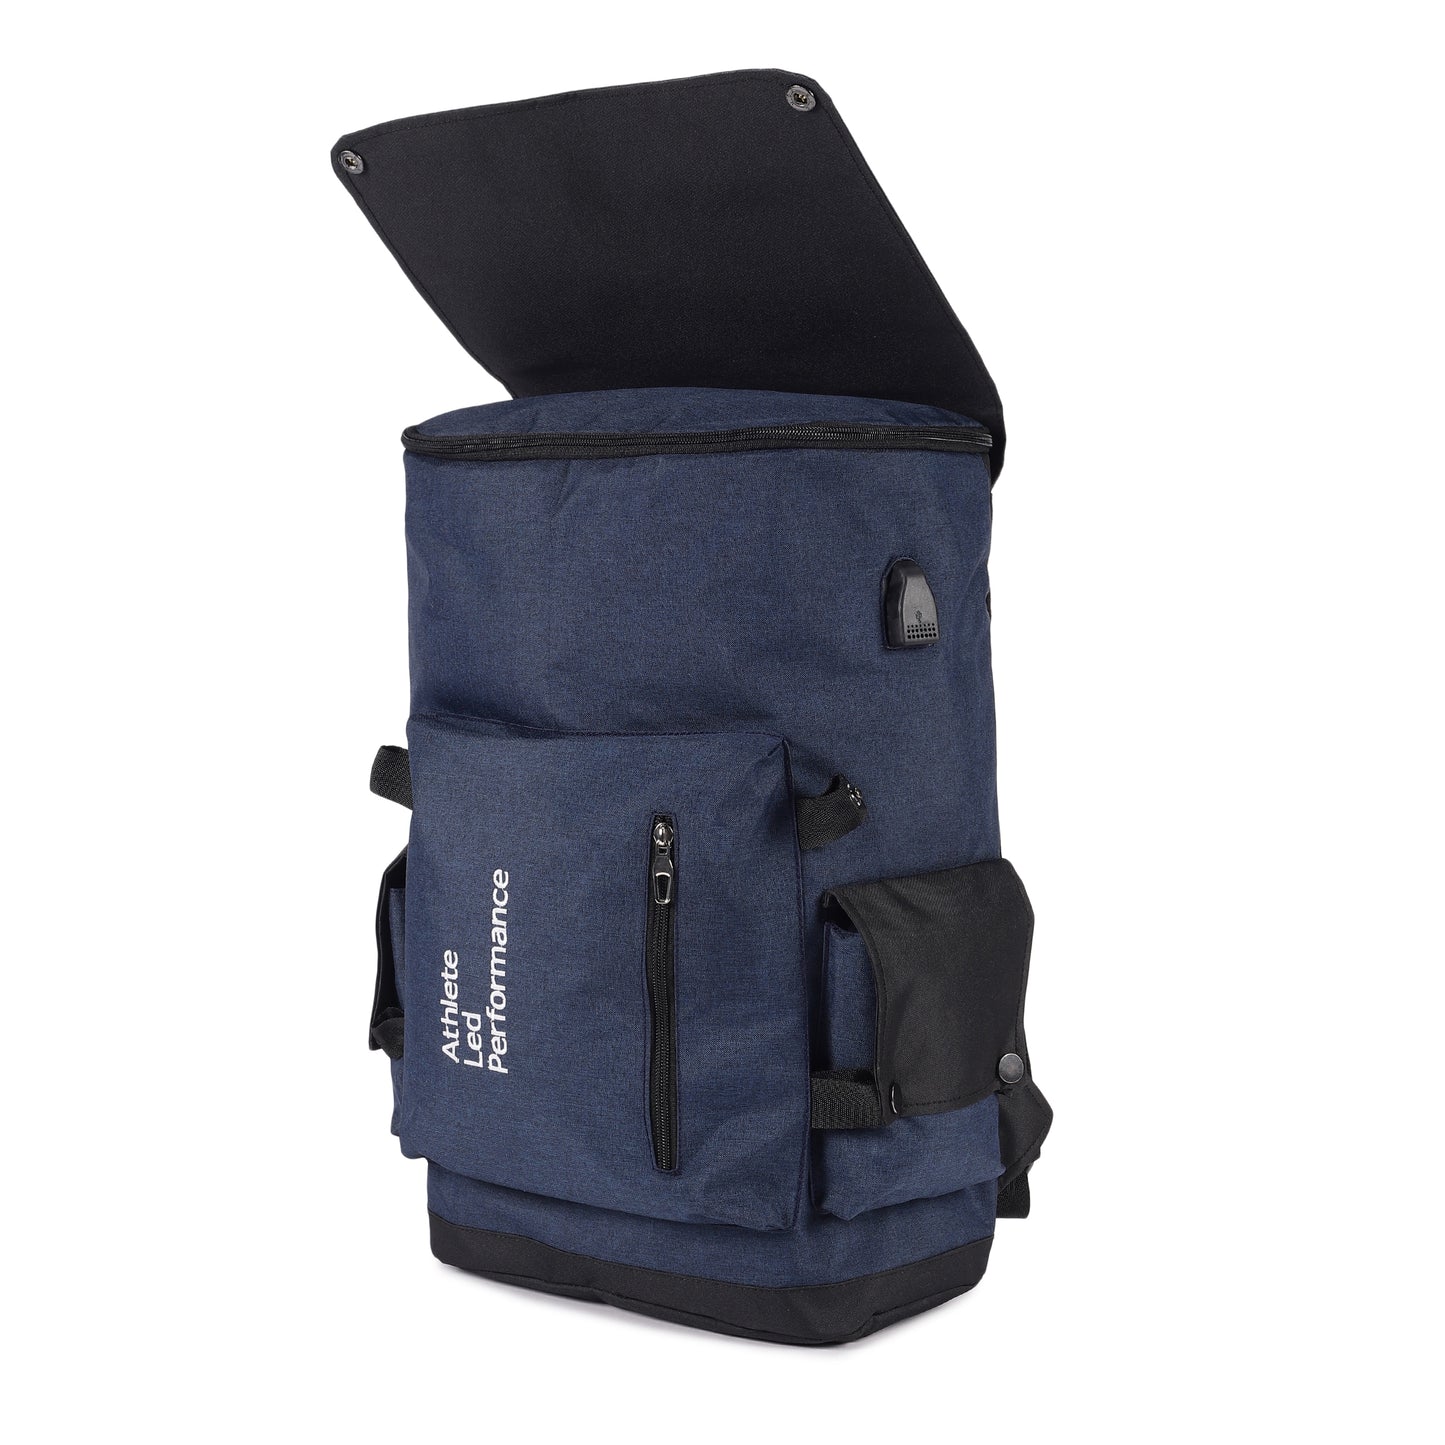 Buy Traverse Backpack Online for Travel & Outdoor - Navy Blue